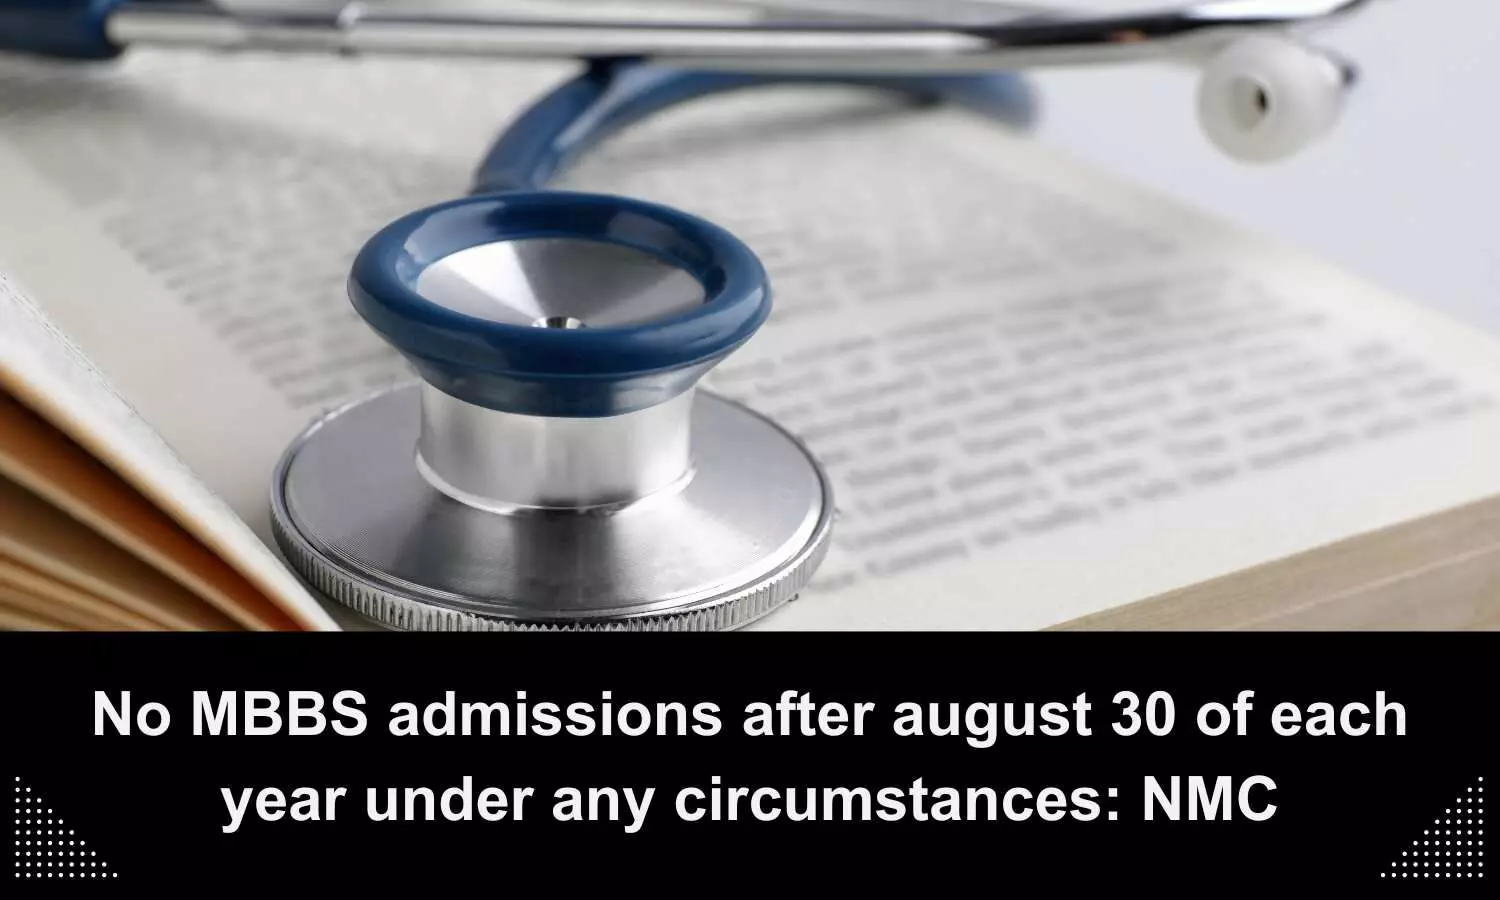 No MBBS admissions after August 30 of each year under any circumstances, says NMC